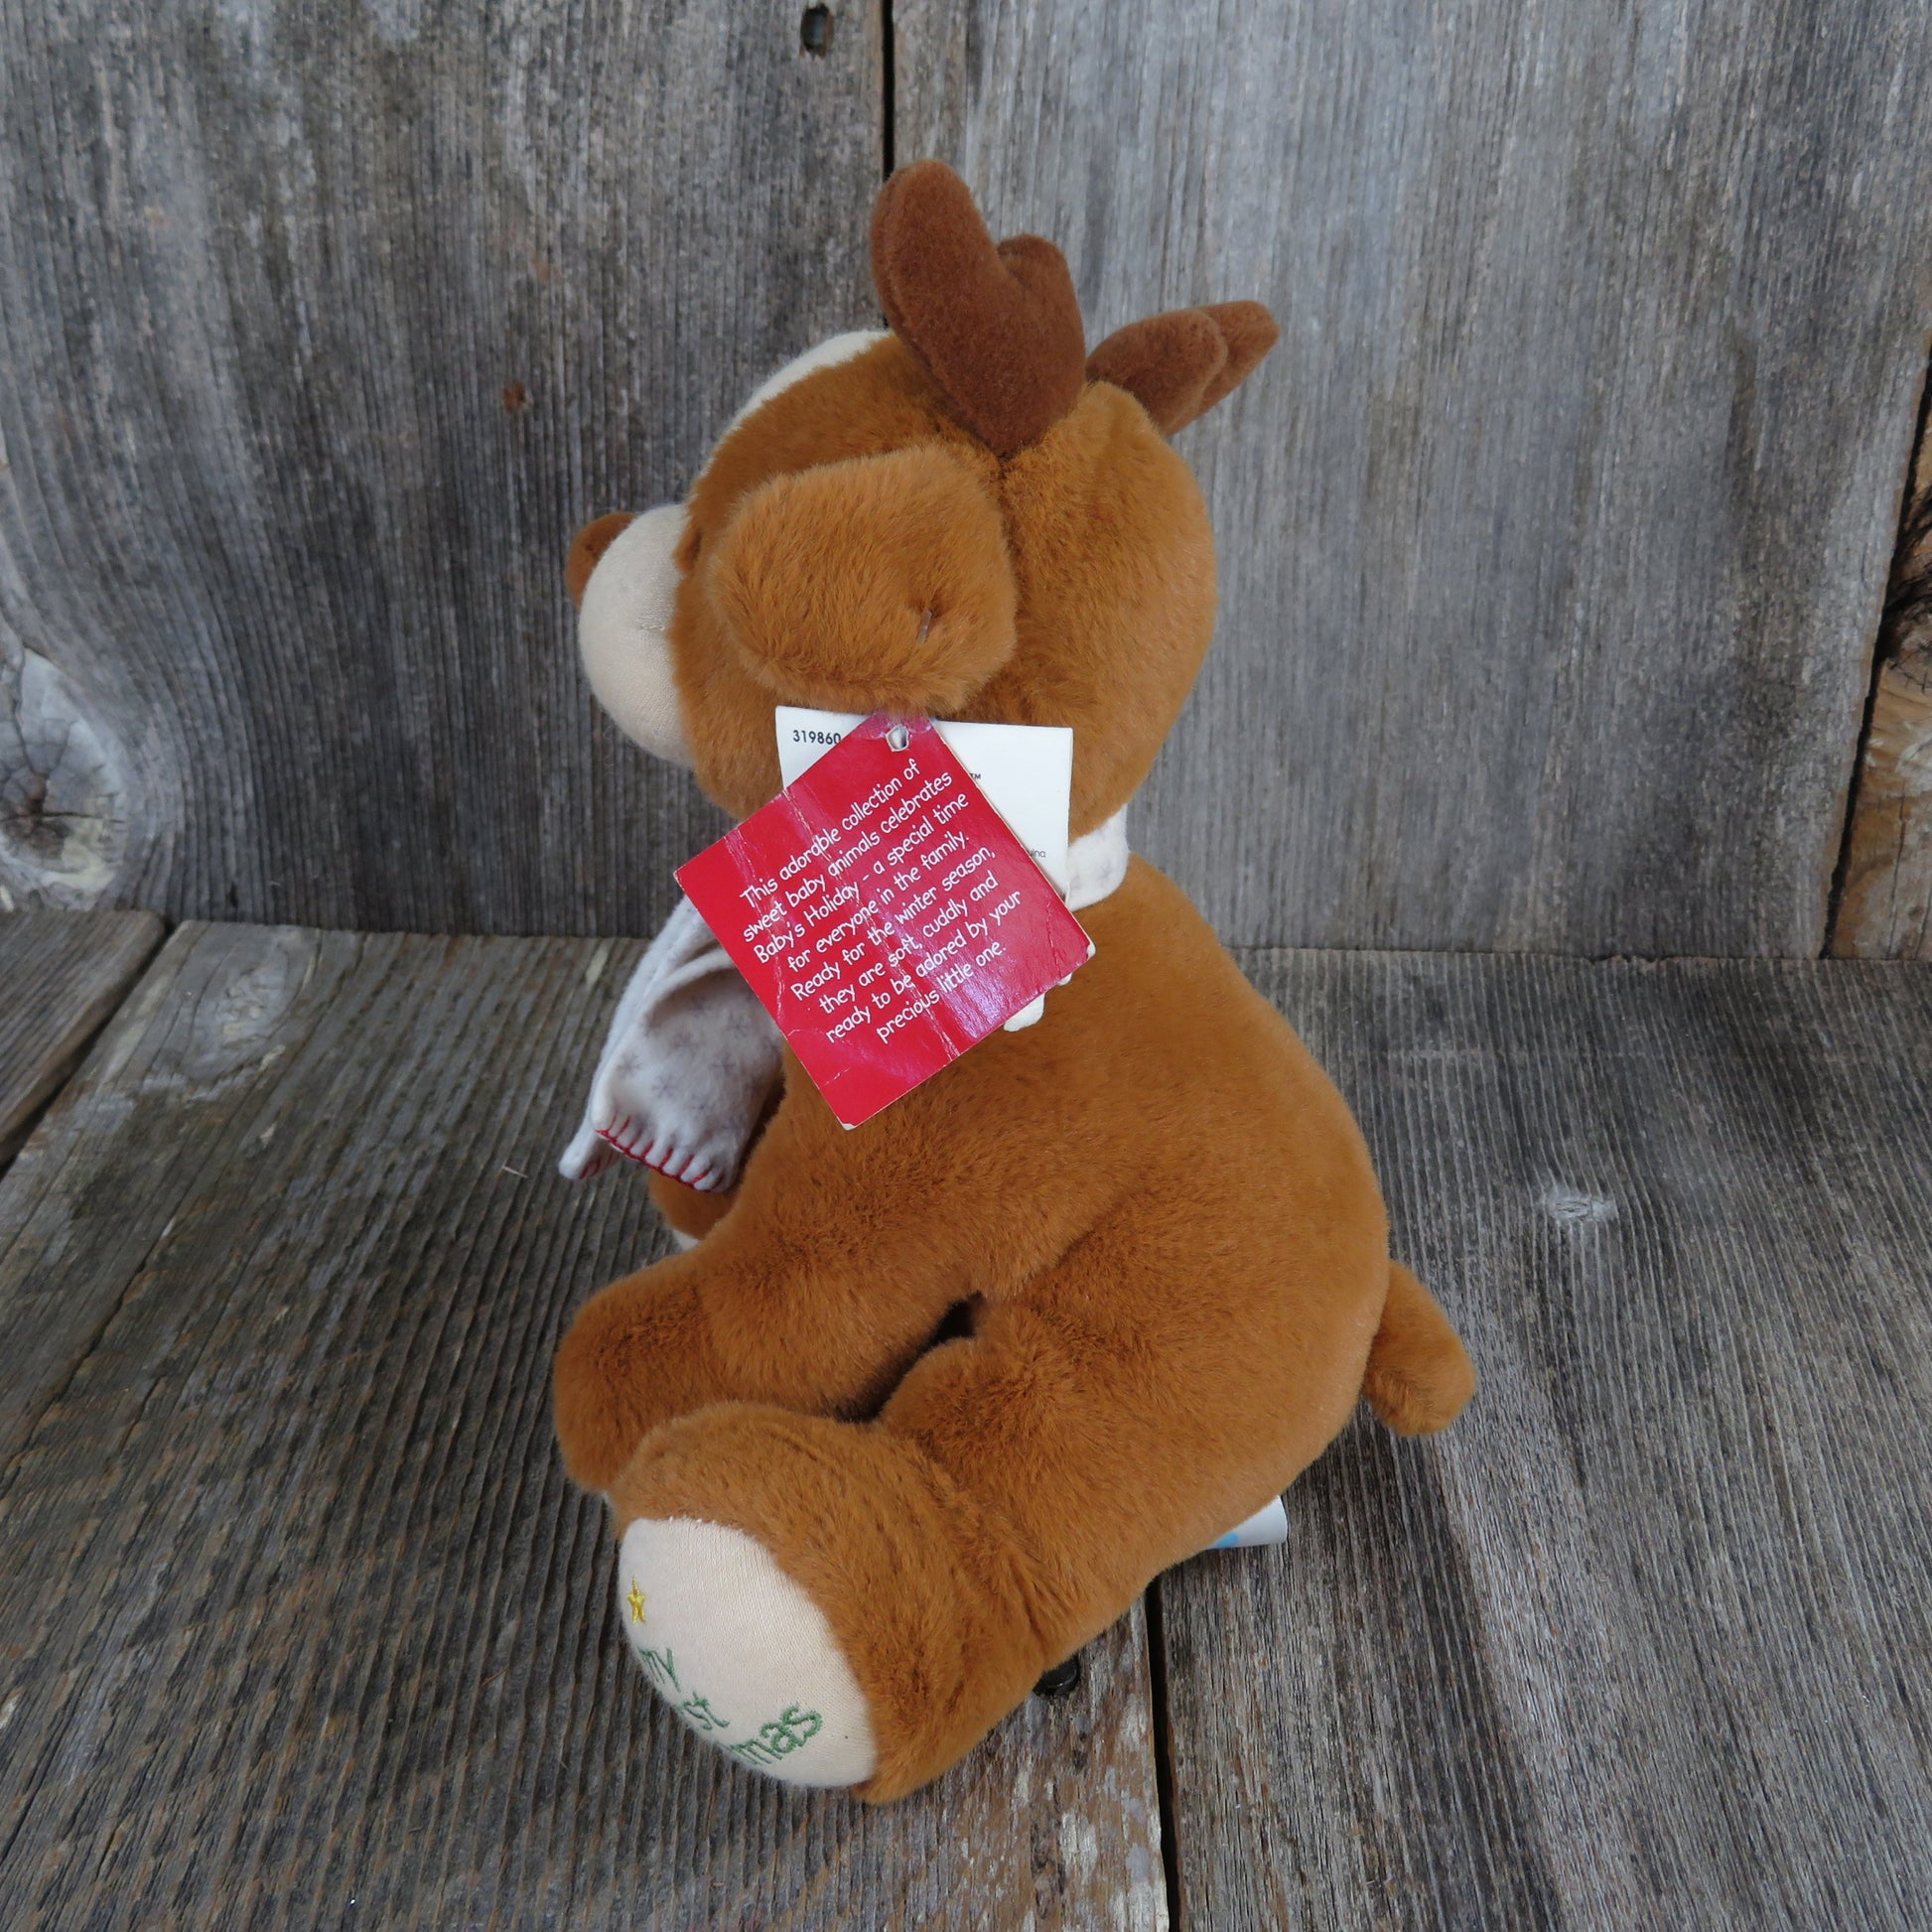 Deer Plush Baby Gund My First Christmas Stuffed Animal Antlers Whimsy Wishes UK - At Grandma's Table